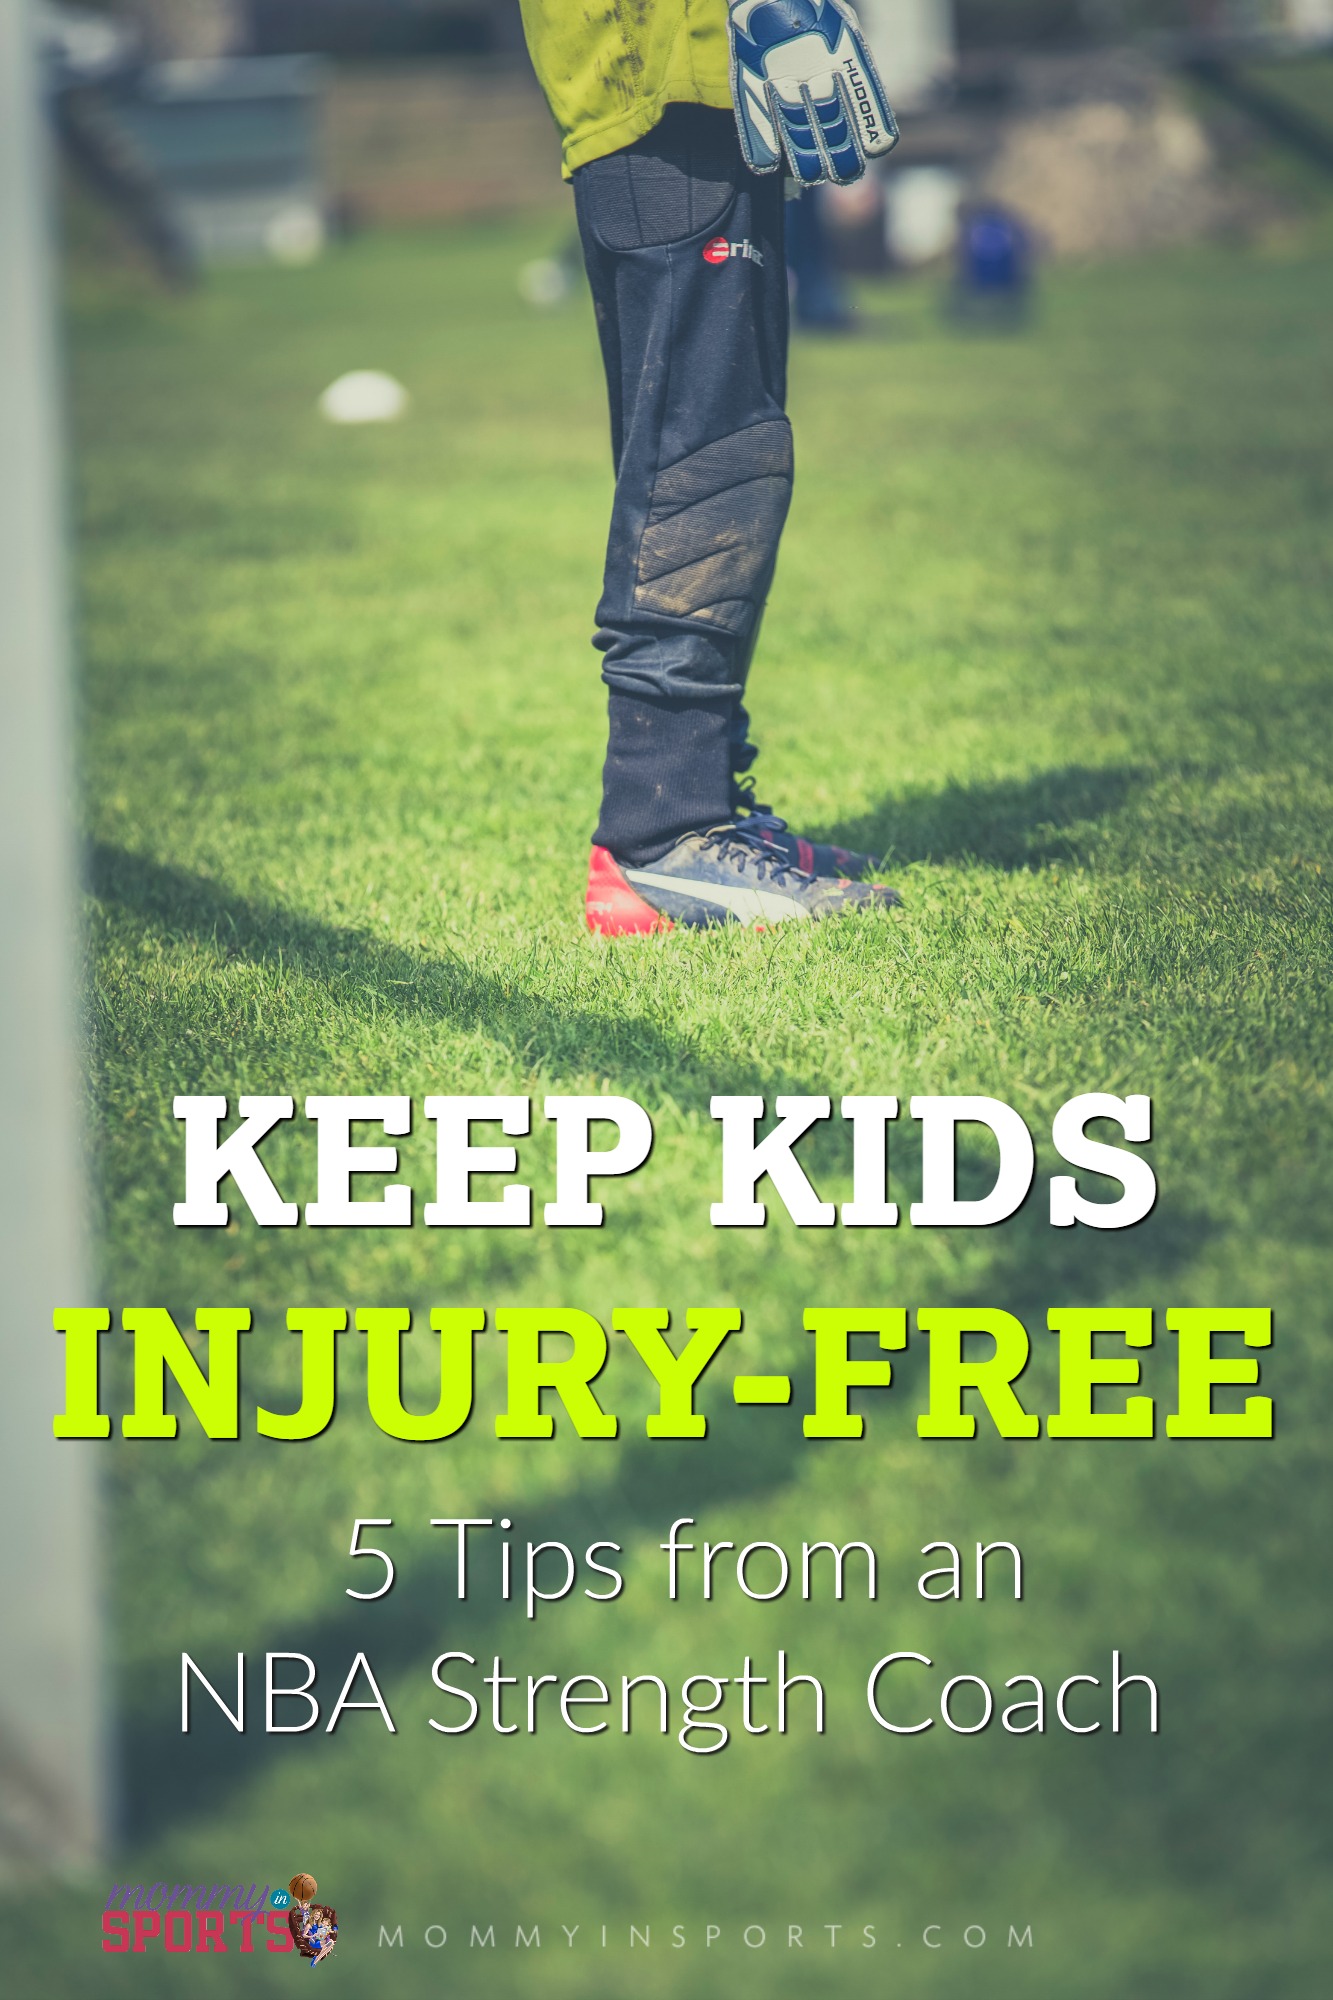 If your kids play sports, keeping them injury-free is a priority. Follow these tips from an NBA coach and help keep your kids safe during youth sports!